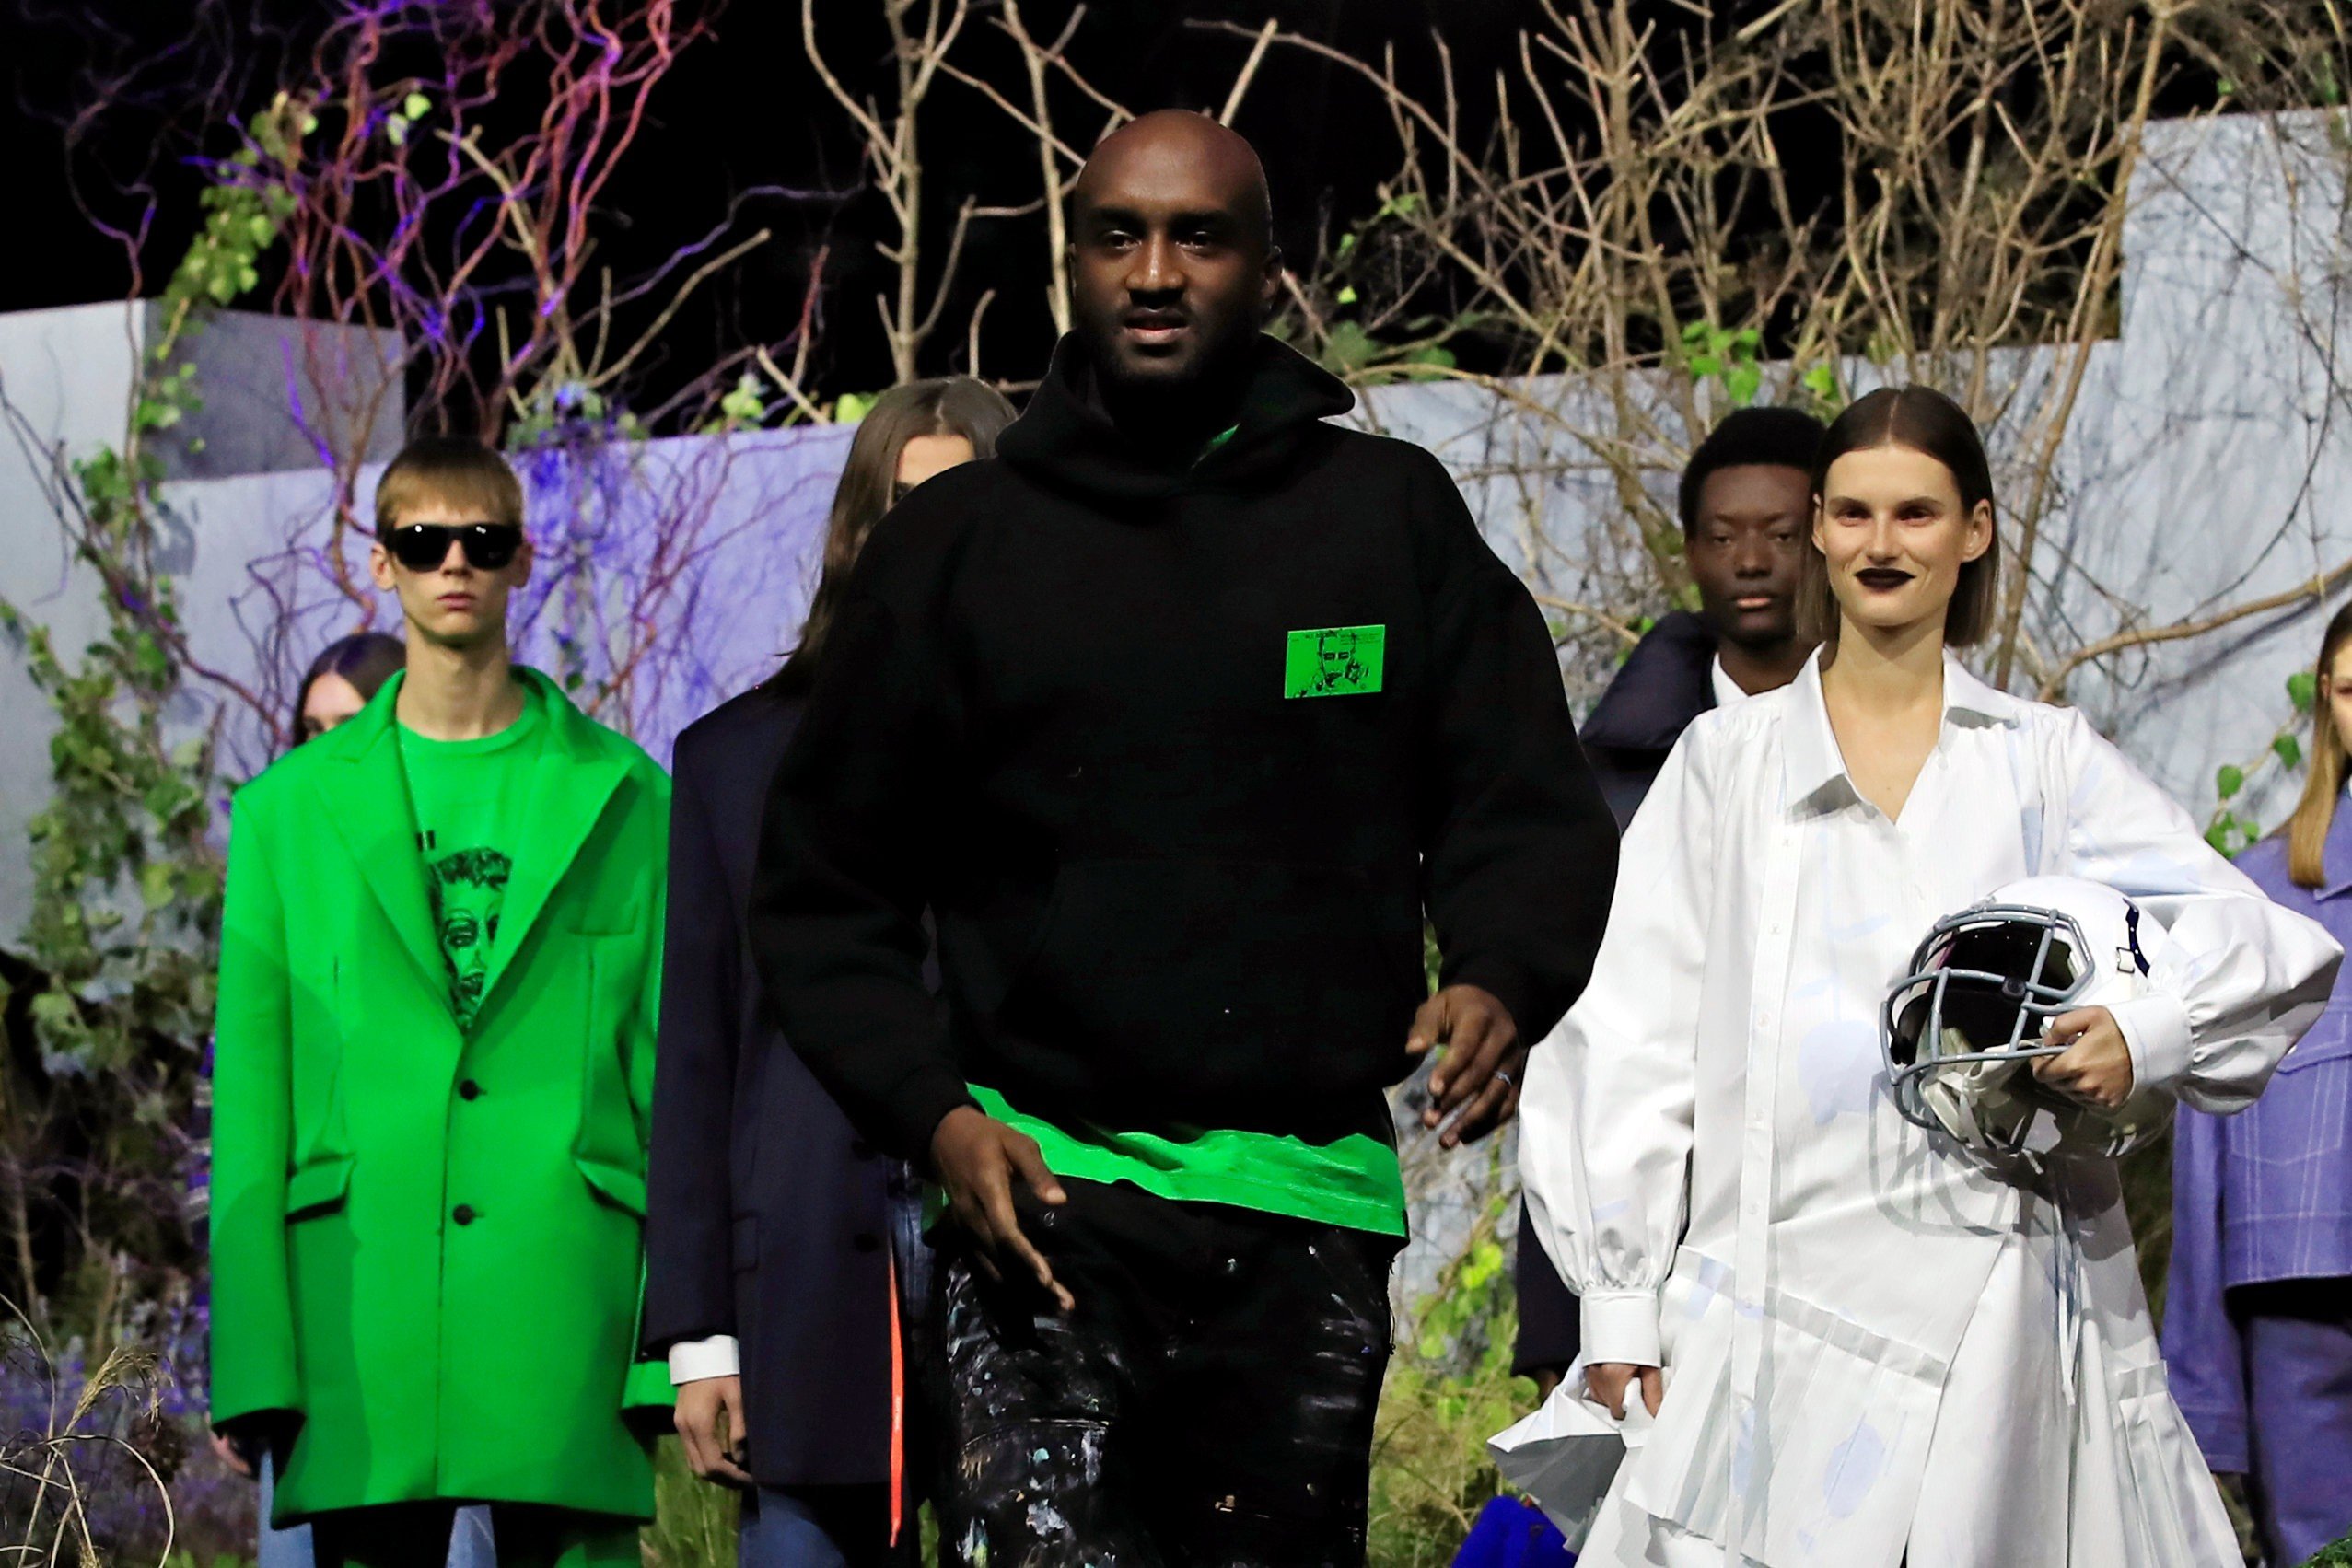 OFF-WHITE C/O VIRGIL ABLOH FALL WINTER 2020 WOMEN'S COLLECTION